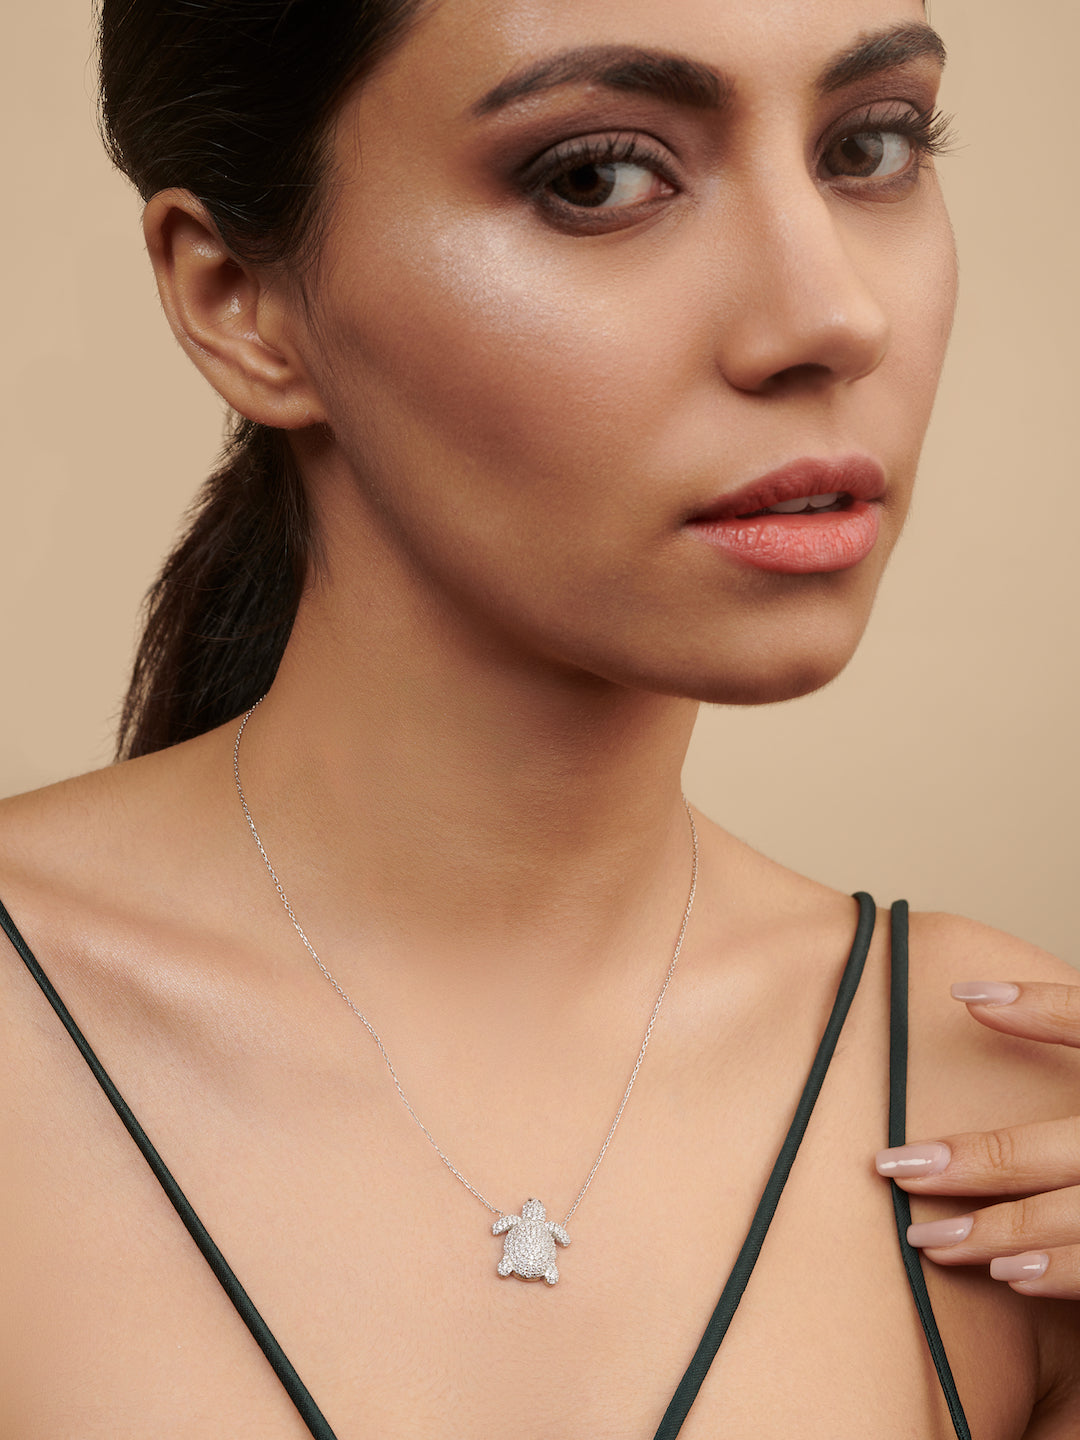  Pure Silver Turtle Necklace Embellished With Cubic Zirconia Stones